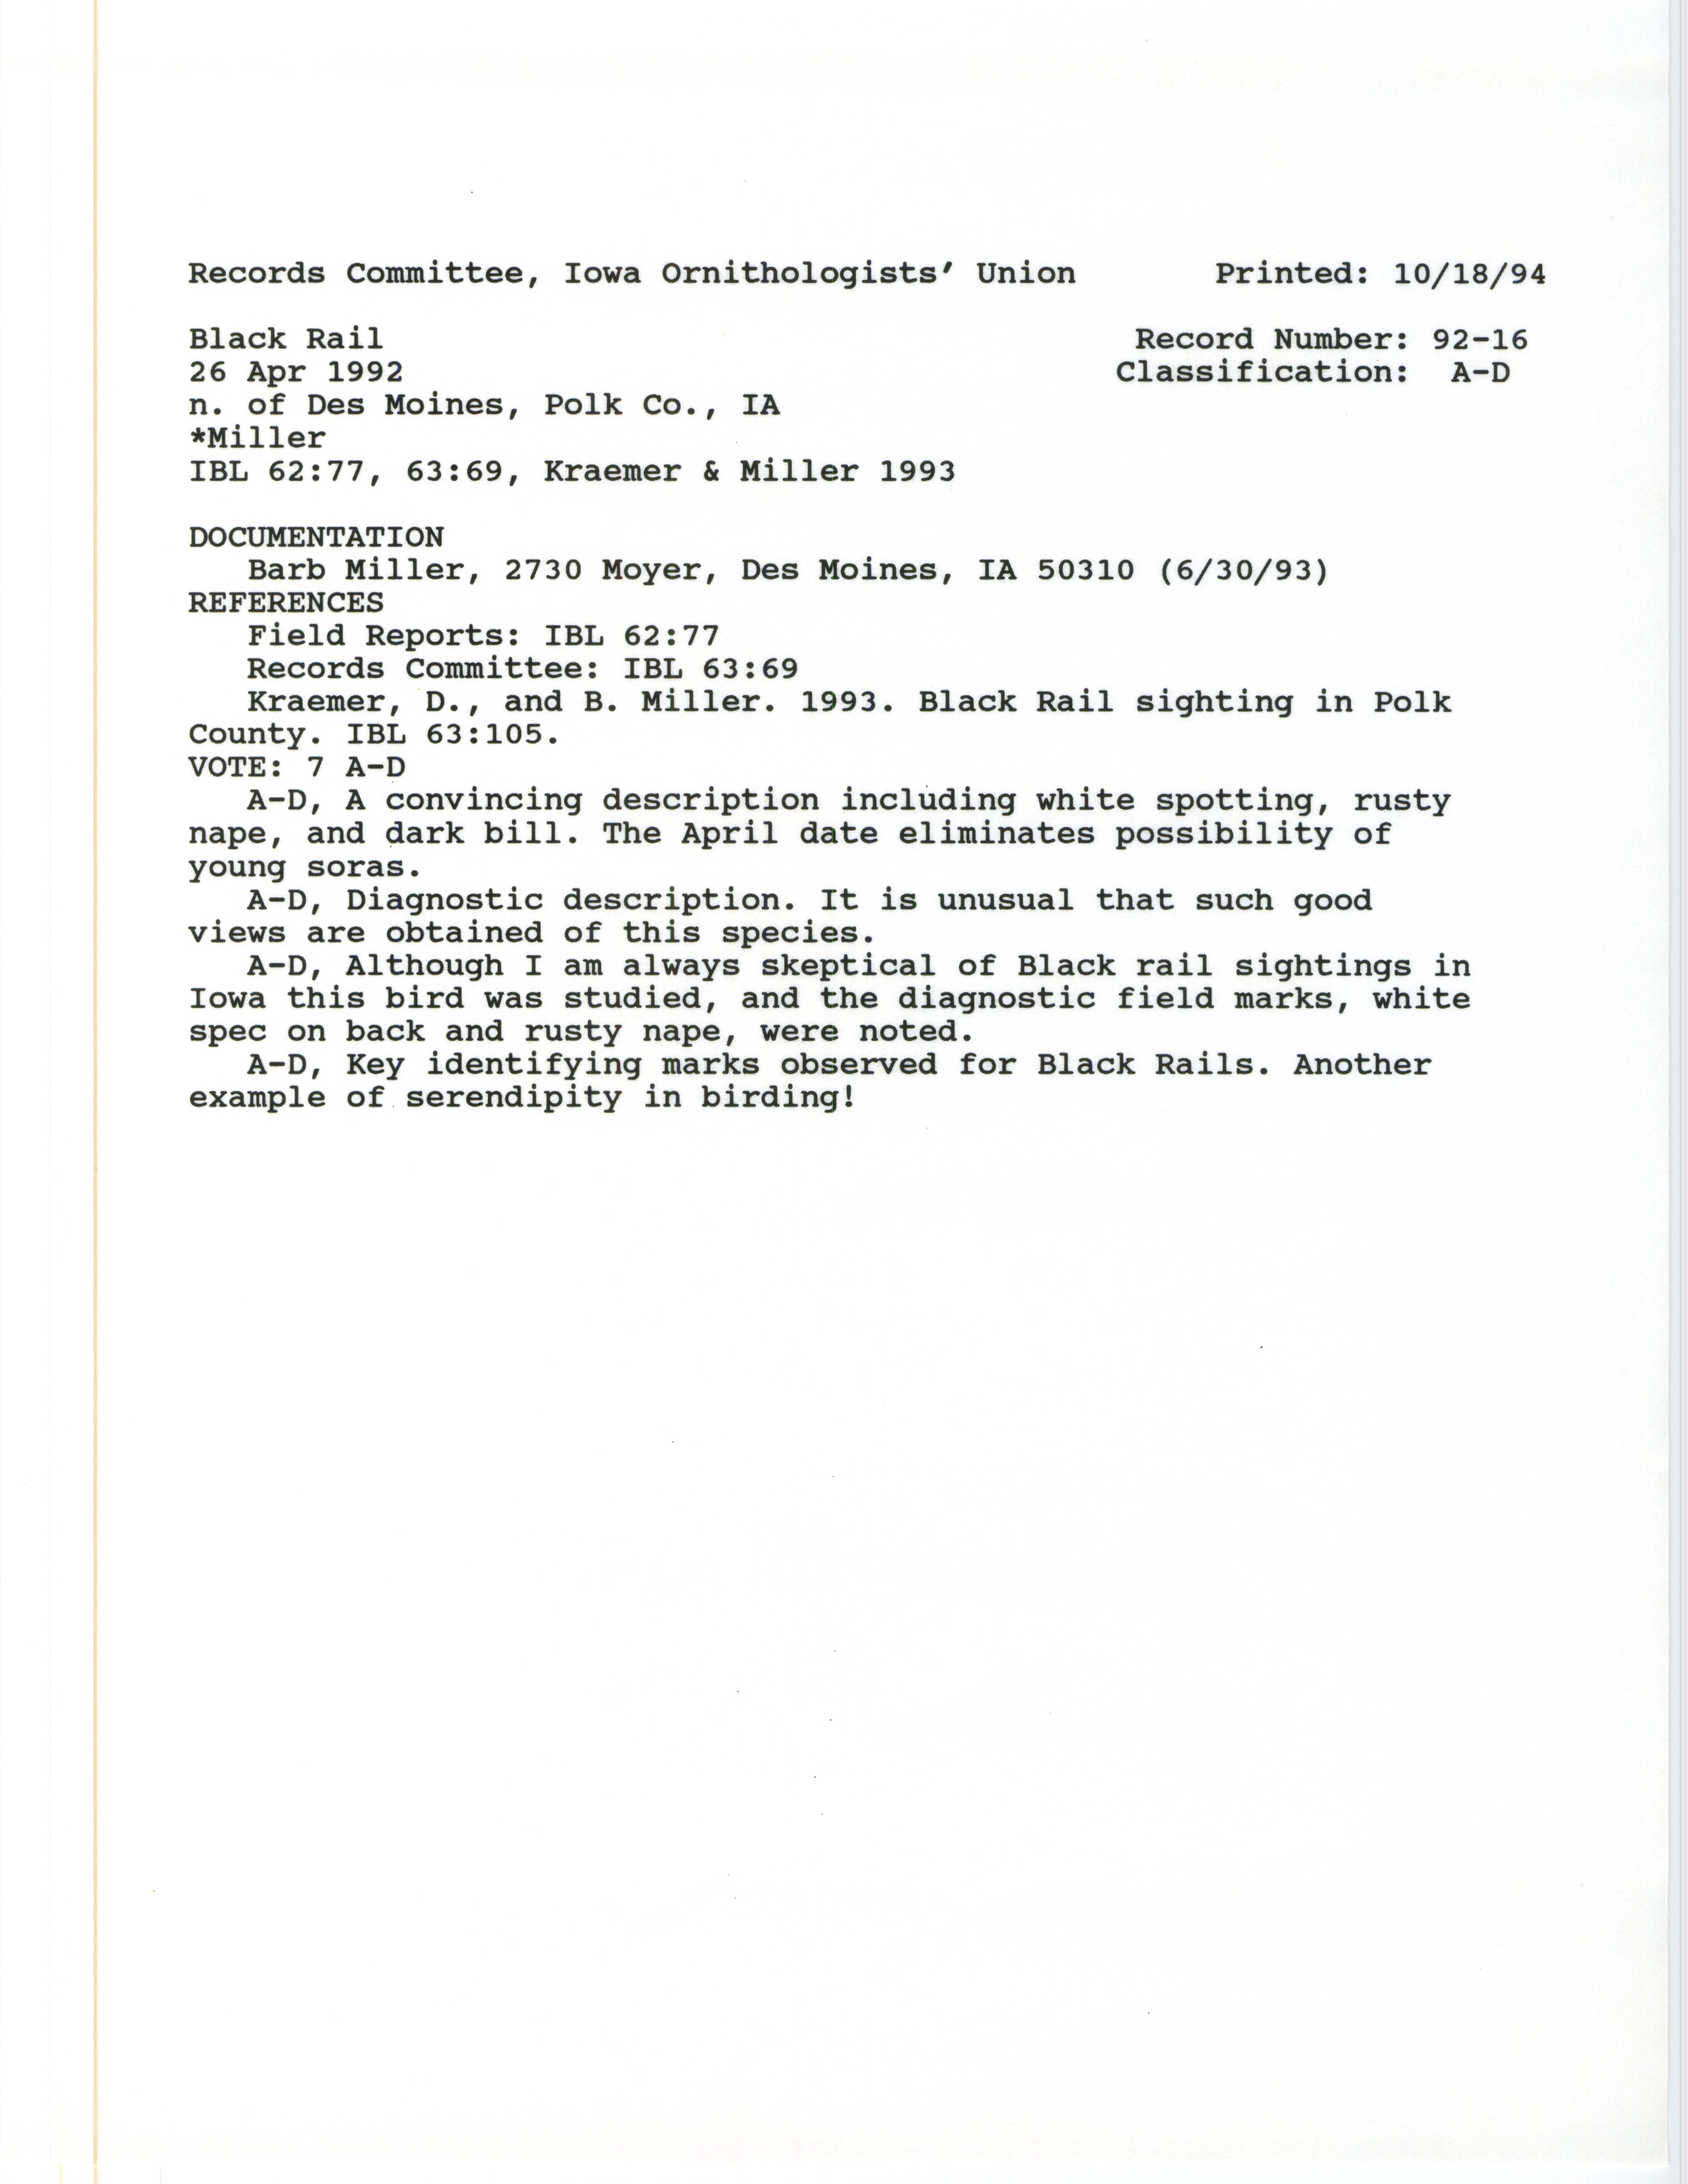 Records Committee review for rare bird sighting of Black Rail at Carney Marsh in Ankeny, 1992